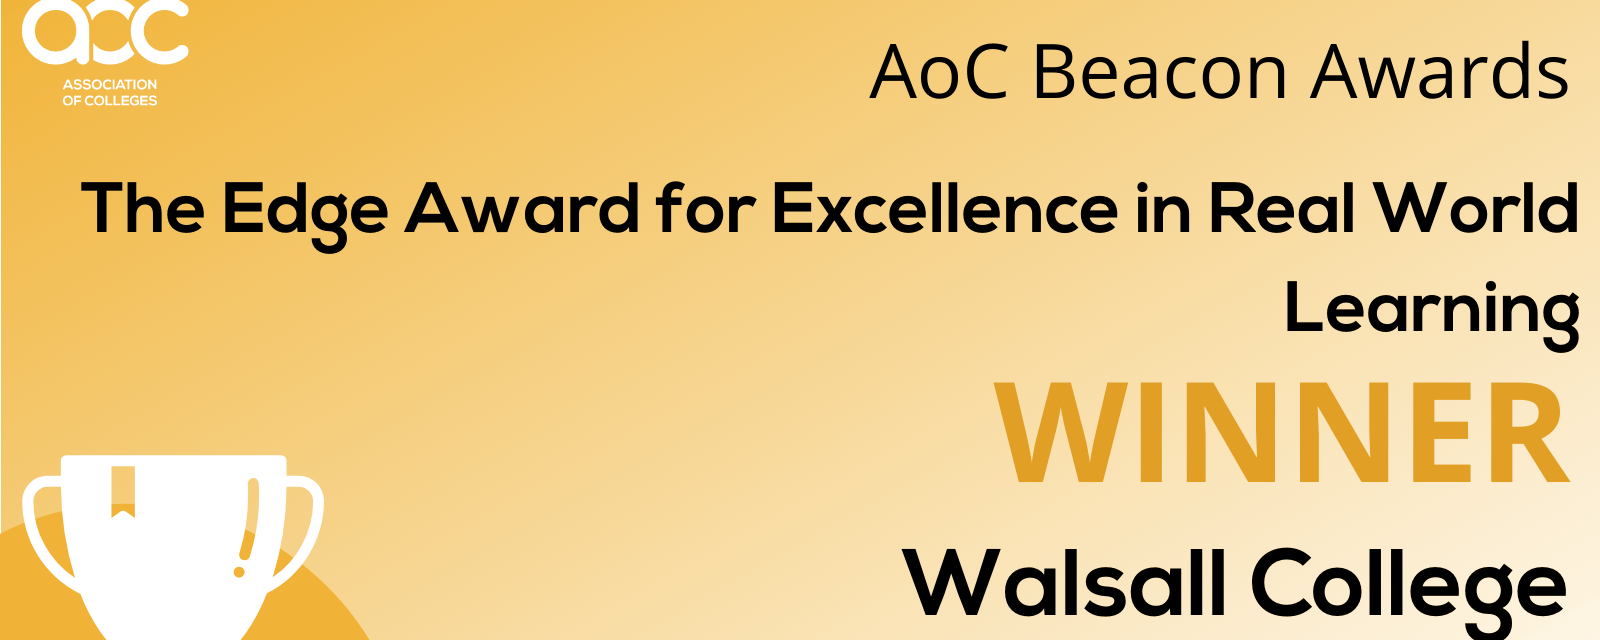 The Edge Award for Excellence in Real World Learning – Walsall College web